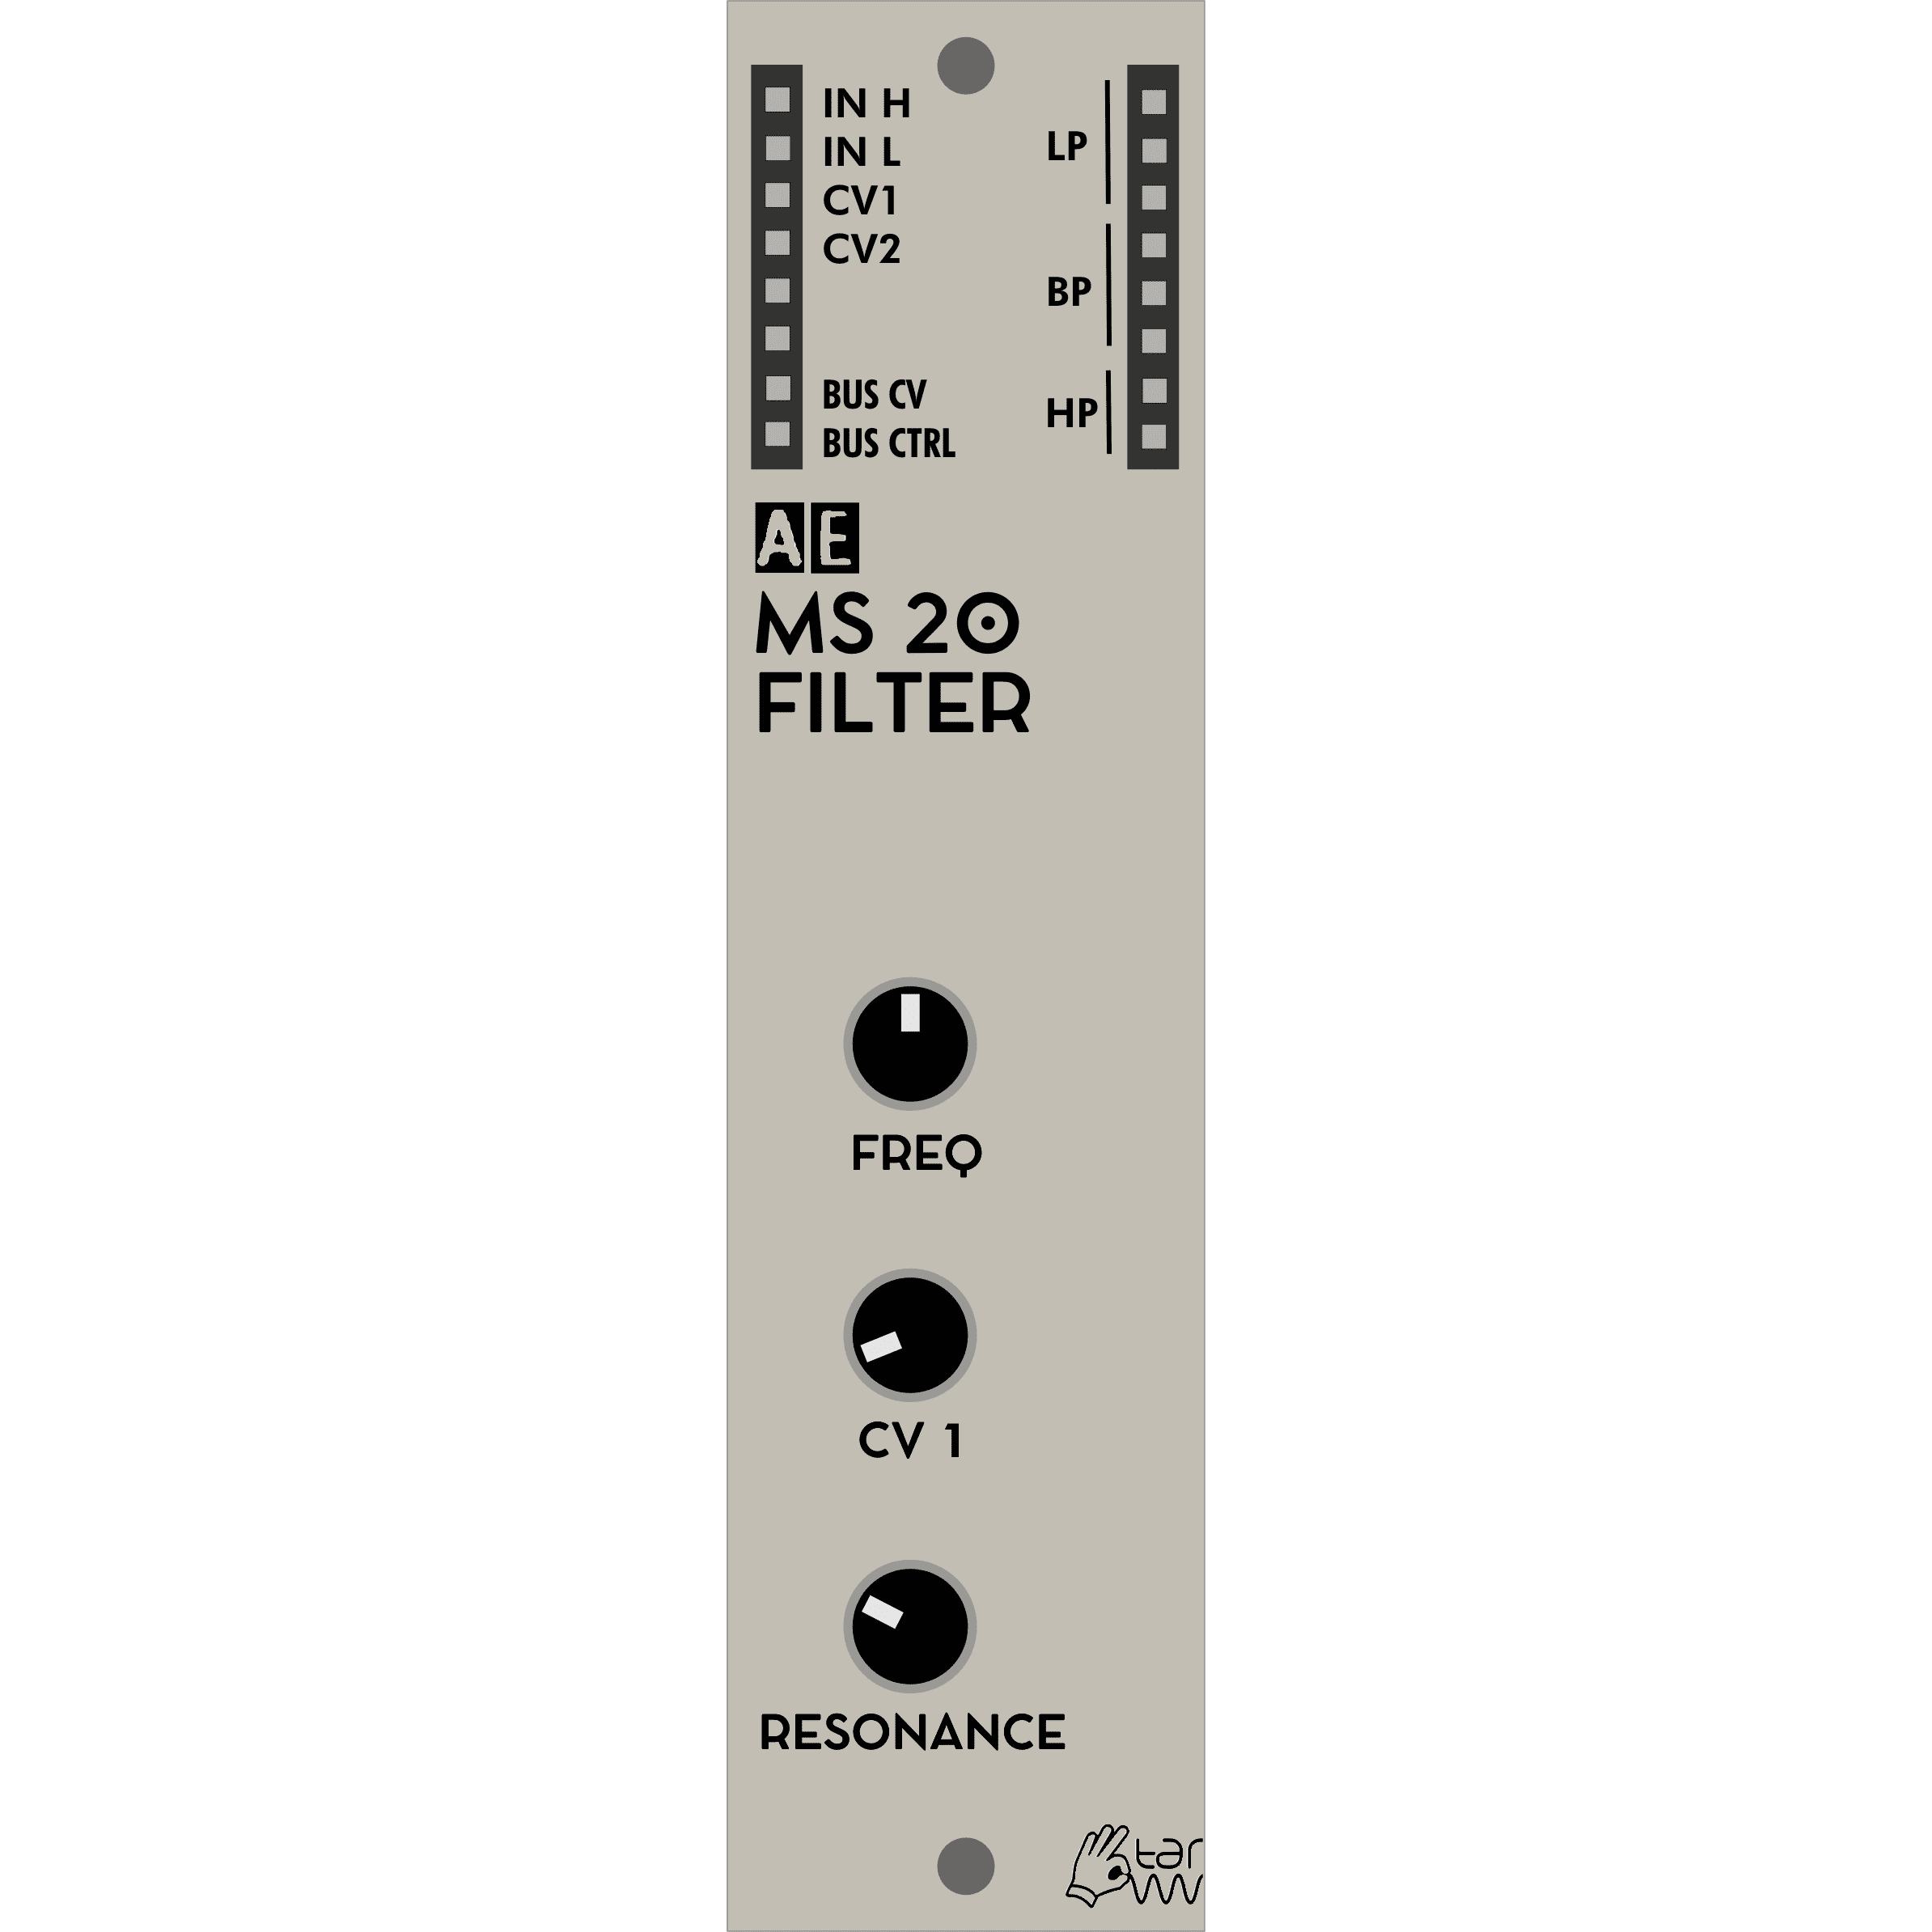 AE Modular Launches MS20 Filter